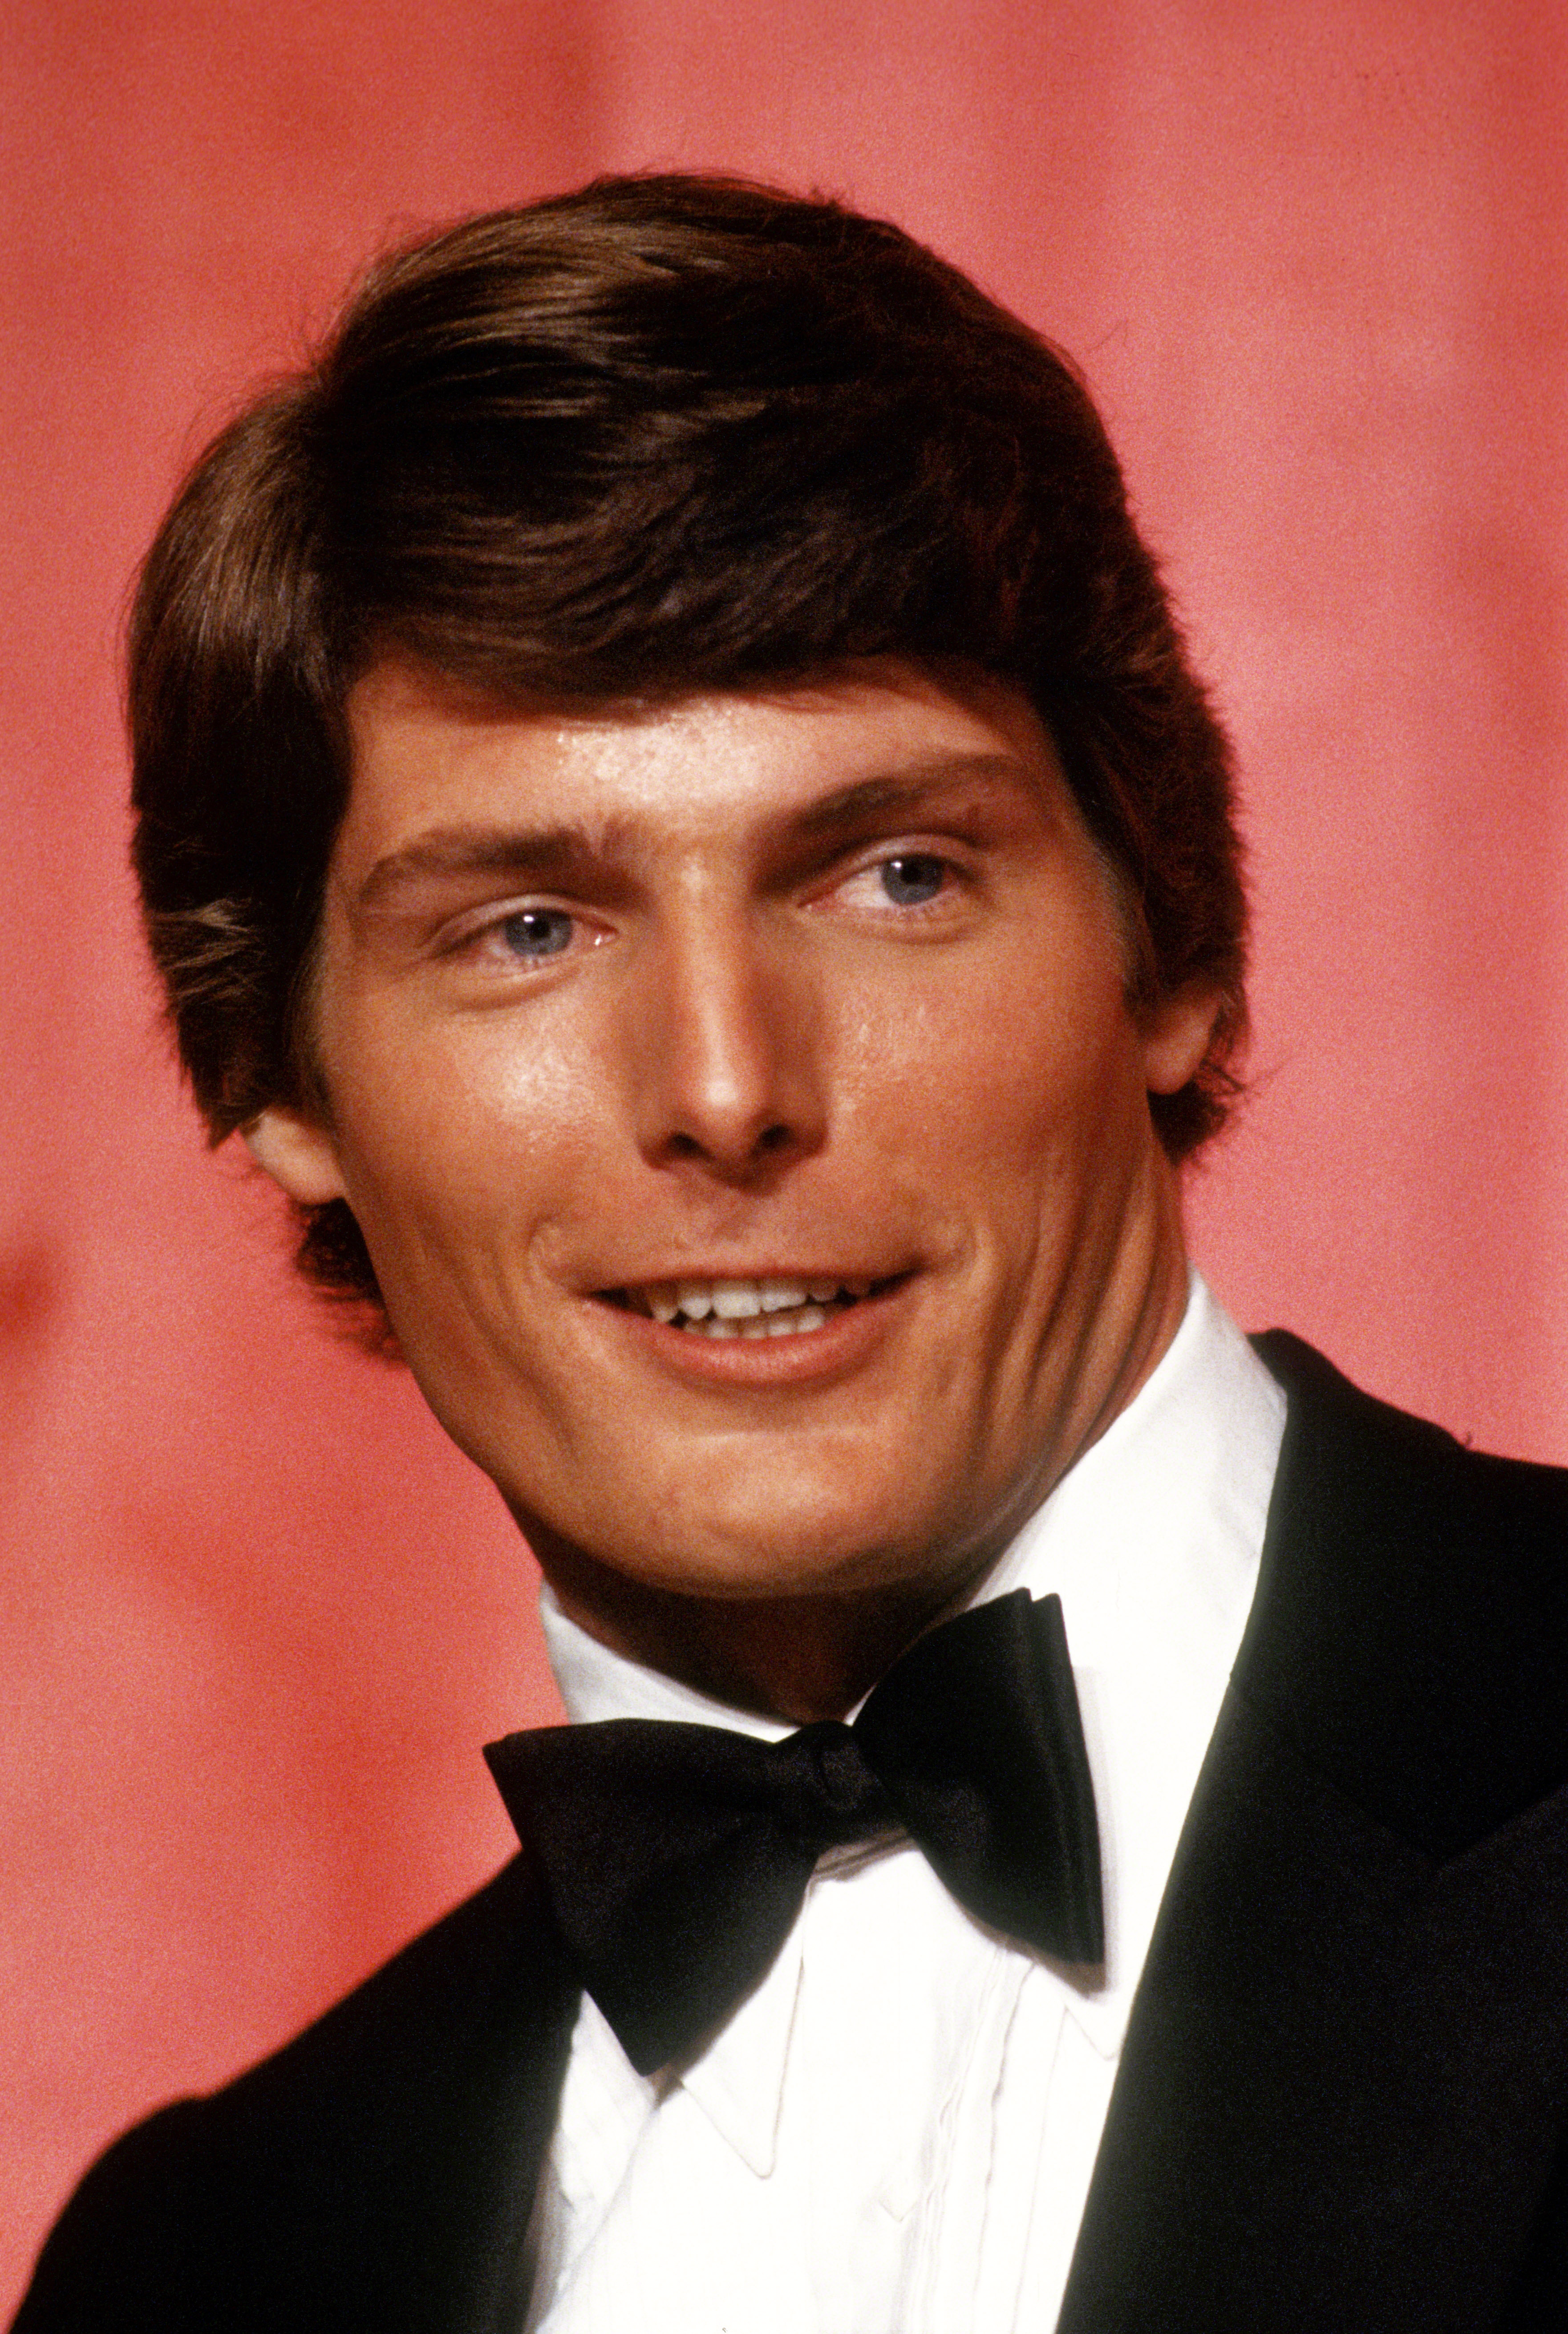 Christopher Reeve attends the 55th Academy Awards circa 1983 in Los Angeles, California | Source: Getty Images